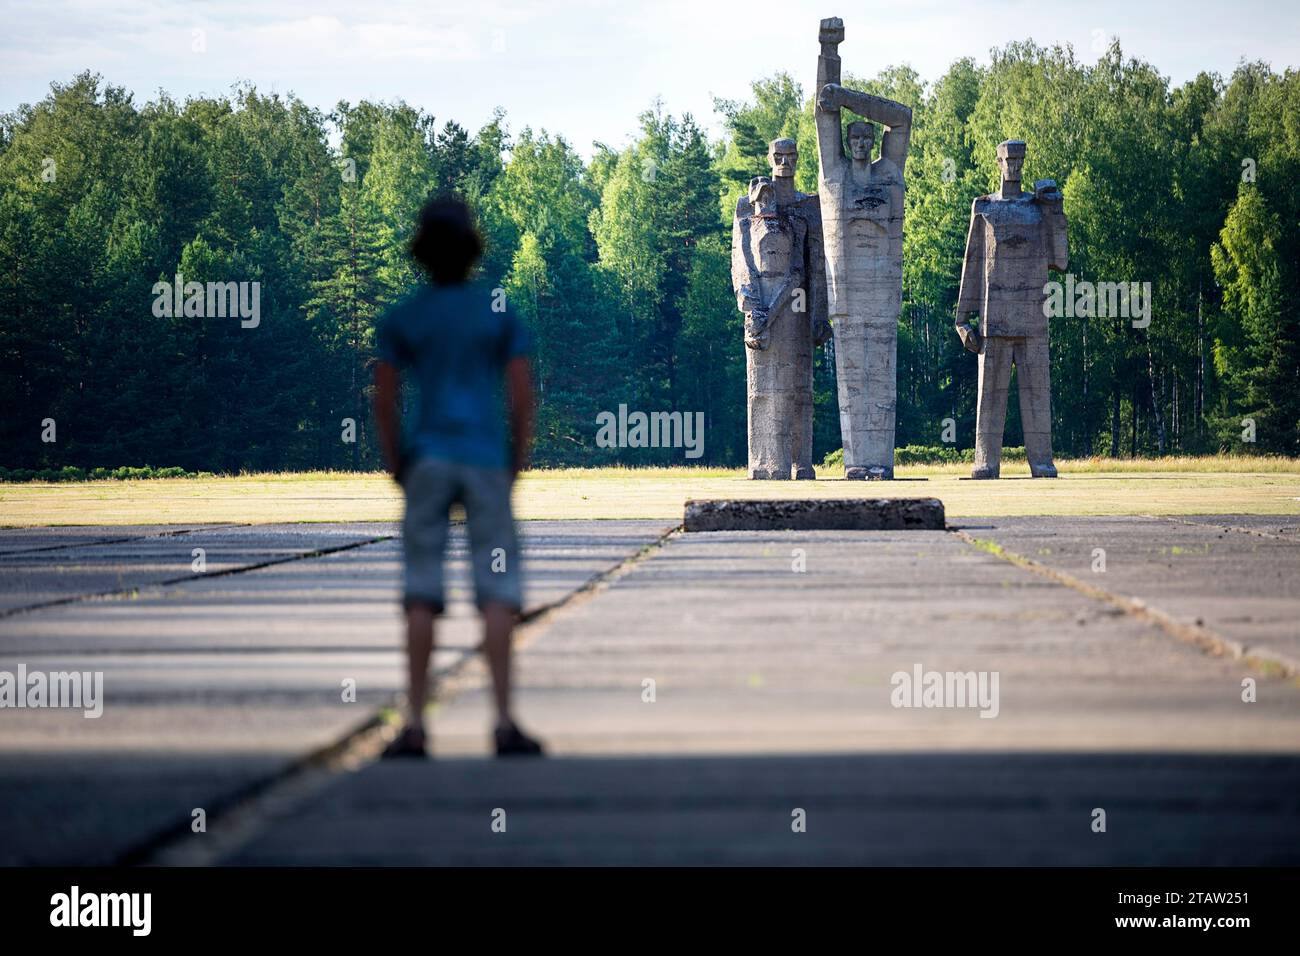 Tourist looking at the giant sculptures at Salaspils Memorial, one of Europe's largest monument complexes commemorating victims of Nazism, Latvia Stock Photo